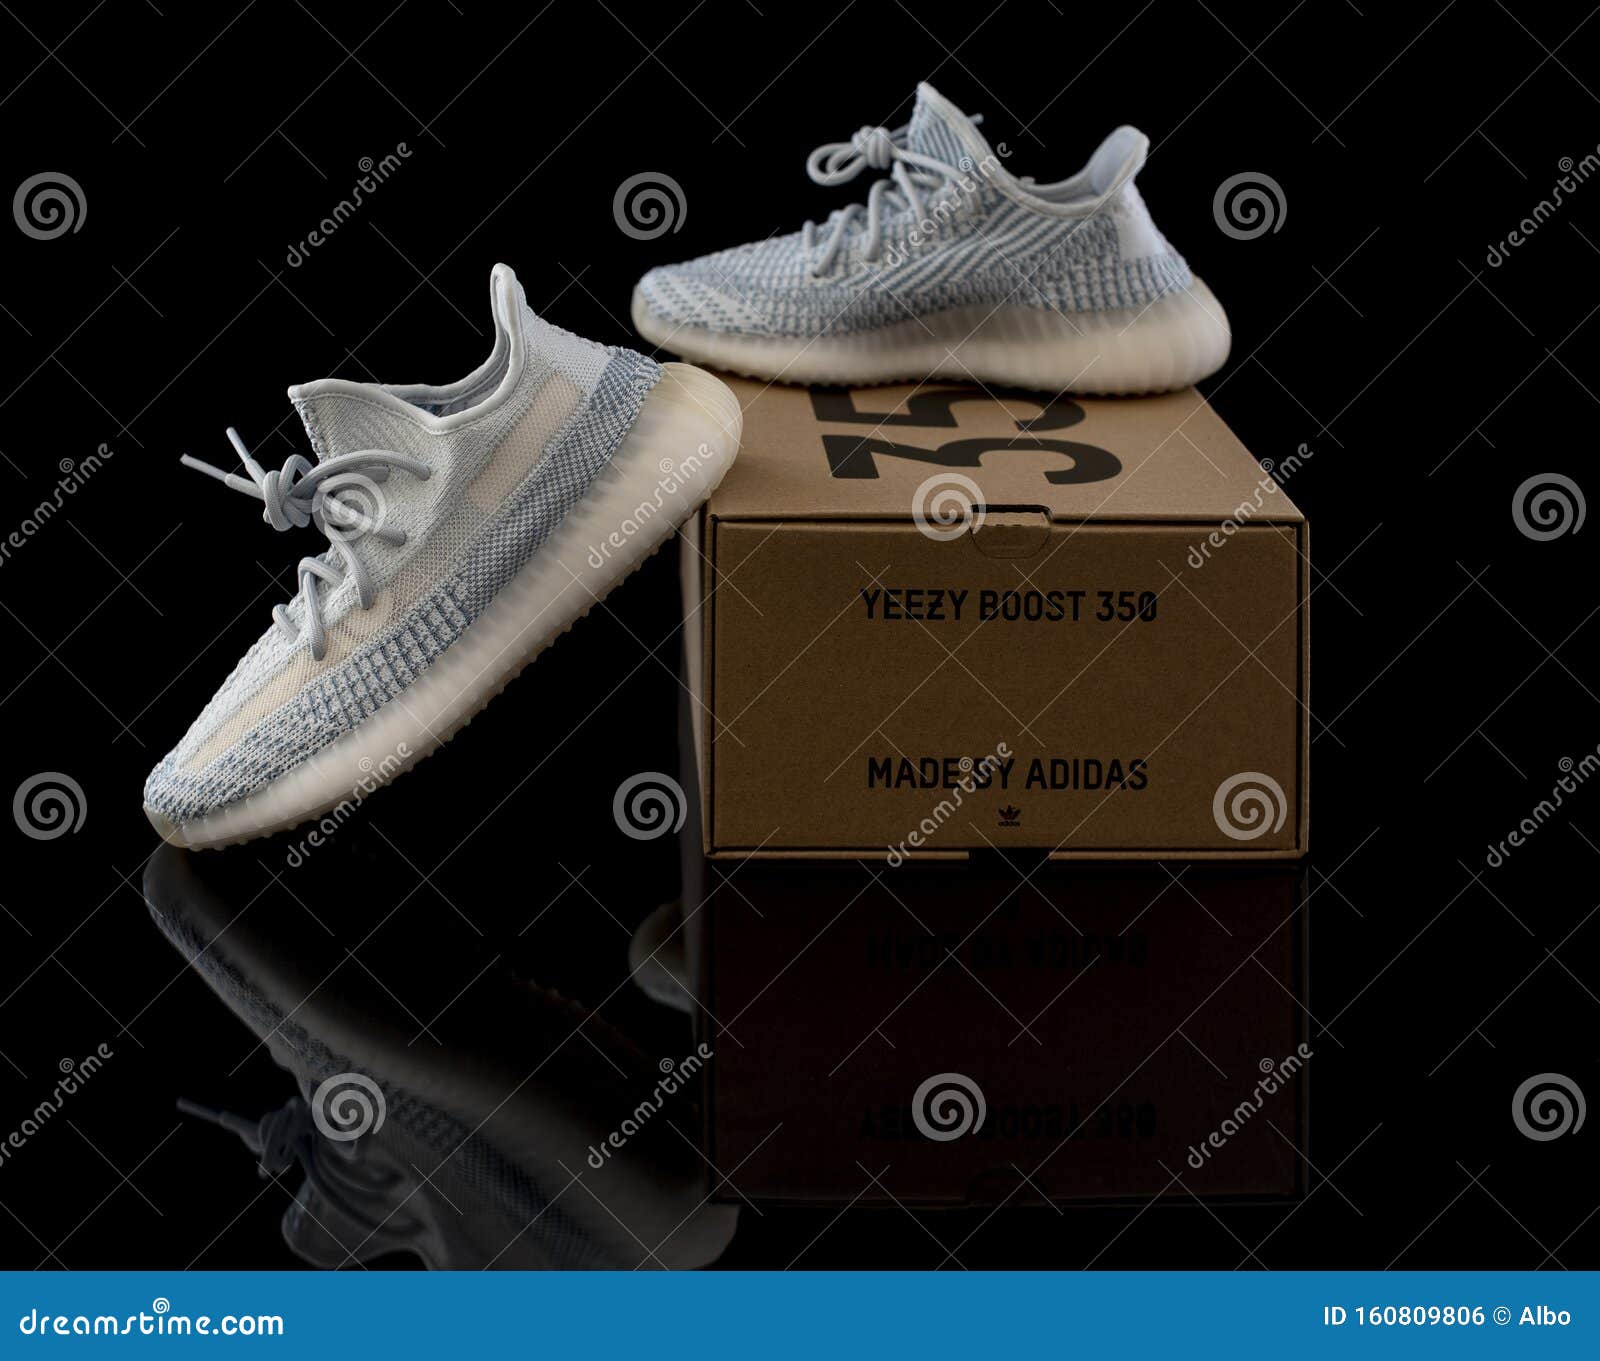 Adidas Yeezy Boost 350 V2 Cloud White Non-Reflective Shoes Studio Editorial - of market, 160809806